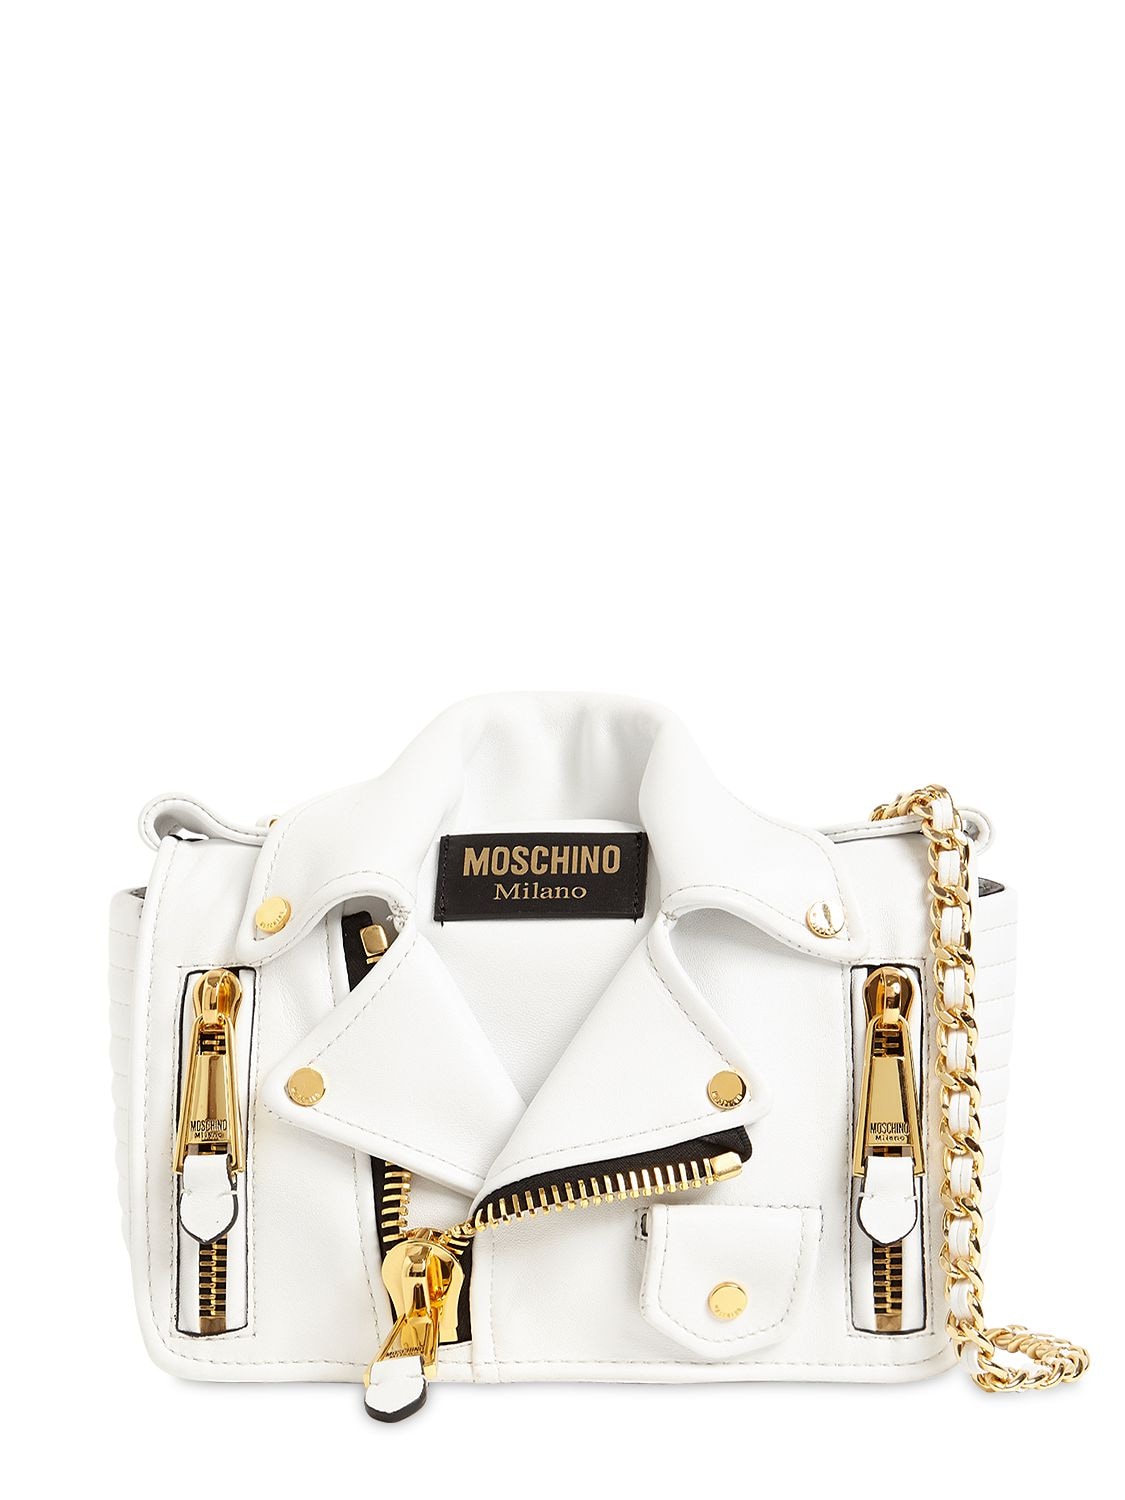 Moschino Biker Leather Shoulder Bag In White